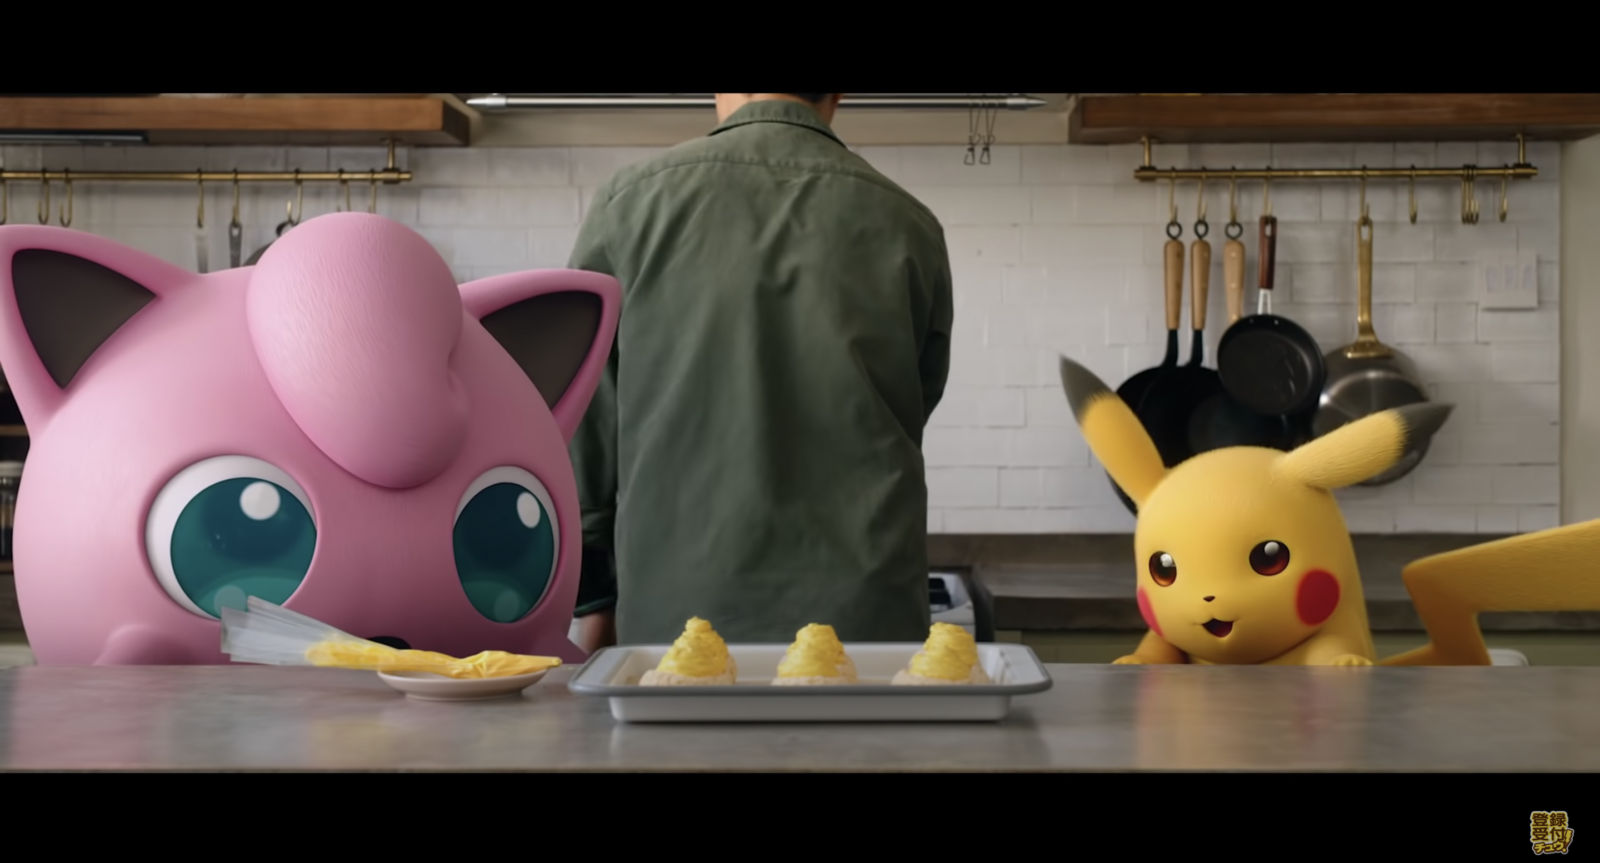 Pokémon releases YouTube cooking videos featuring Pikachu & Jigglypuff